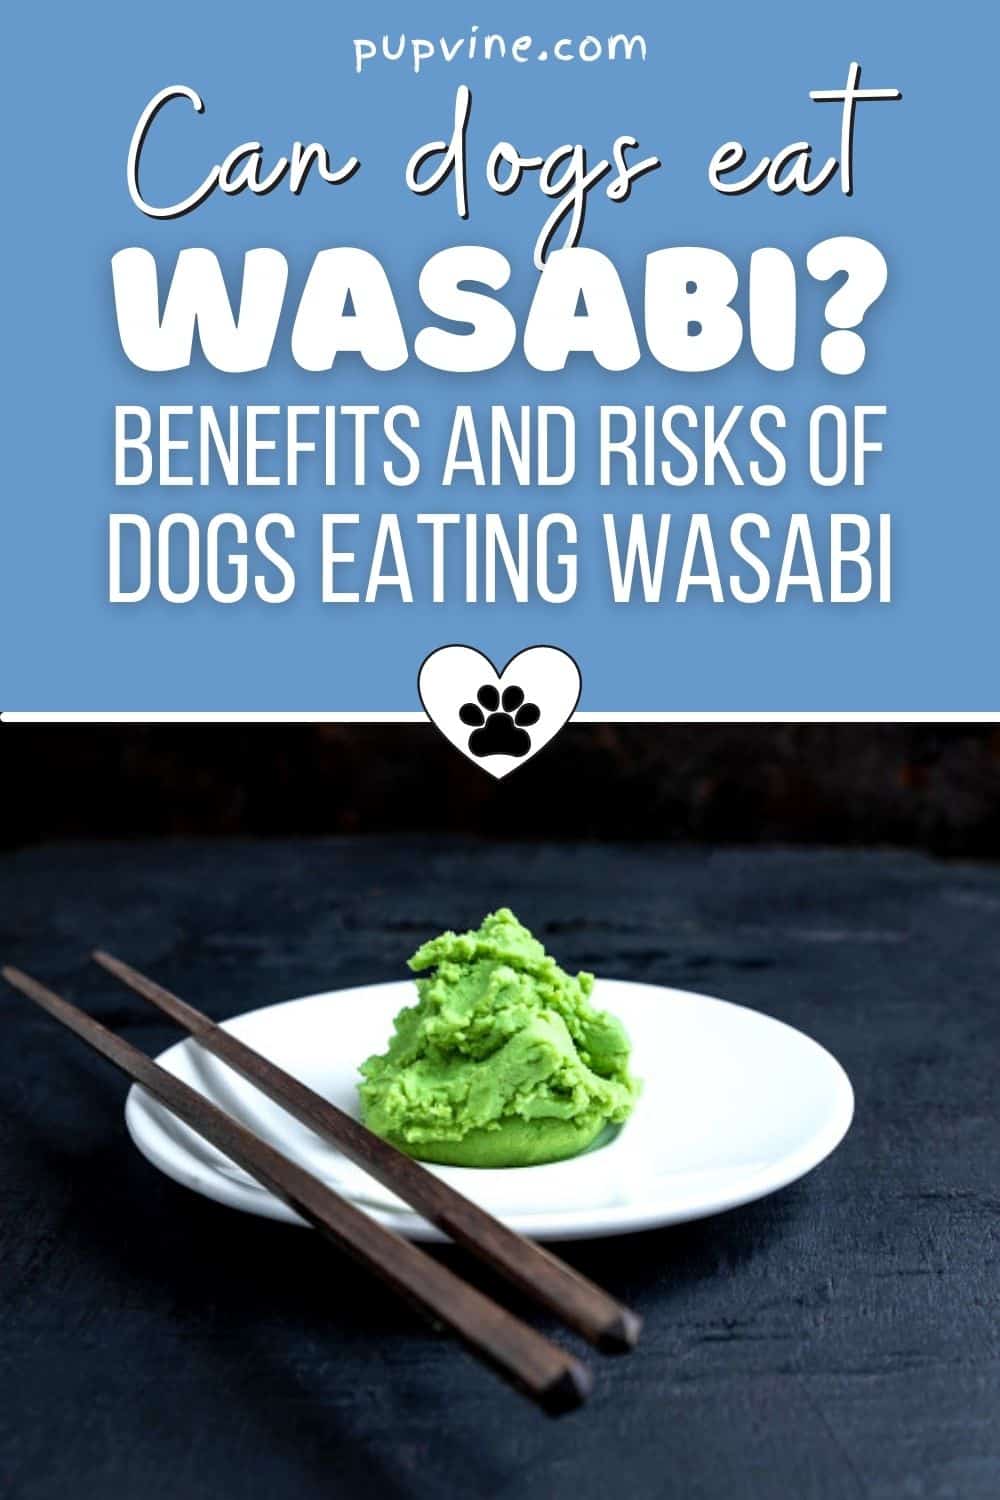 Can Dogs Eat Wasabi? Benefits And Risks of Dogs Eating Wasabi